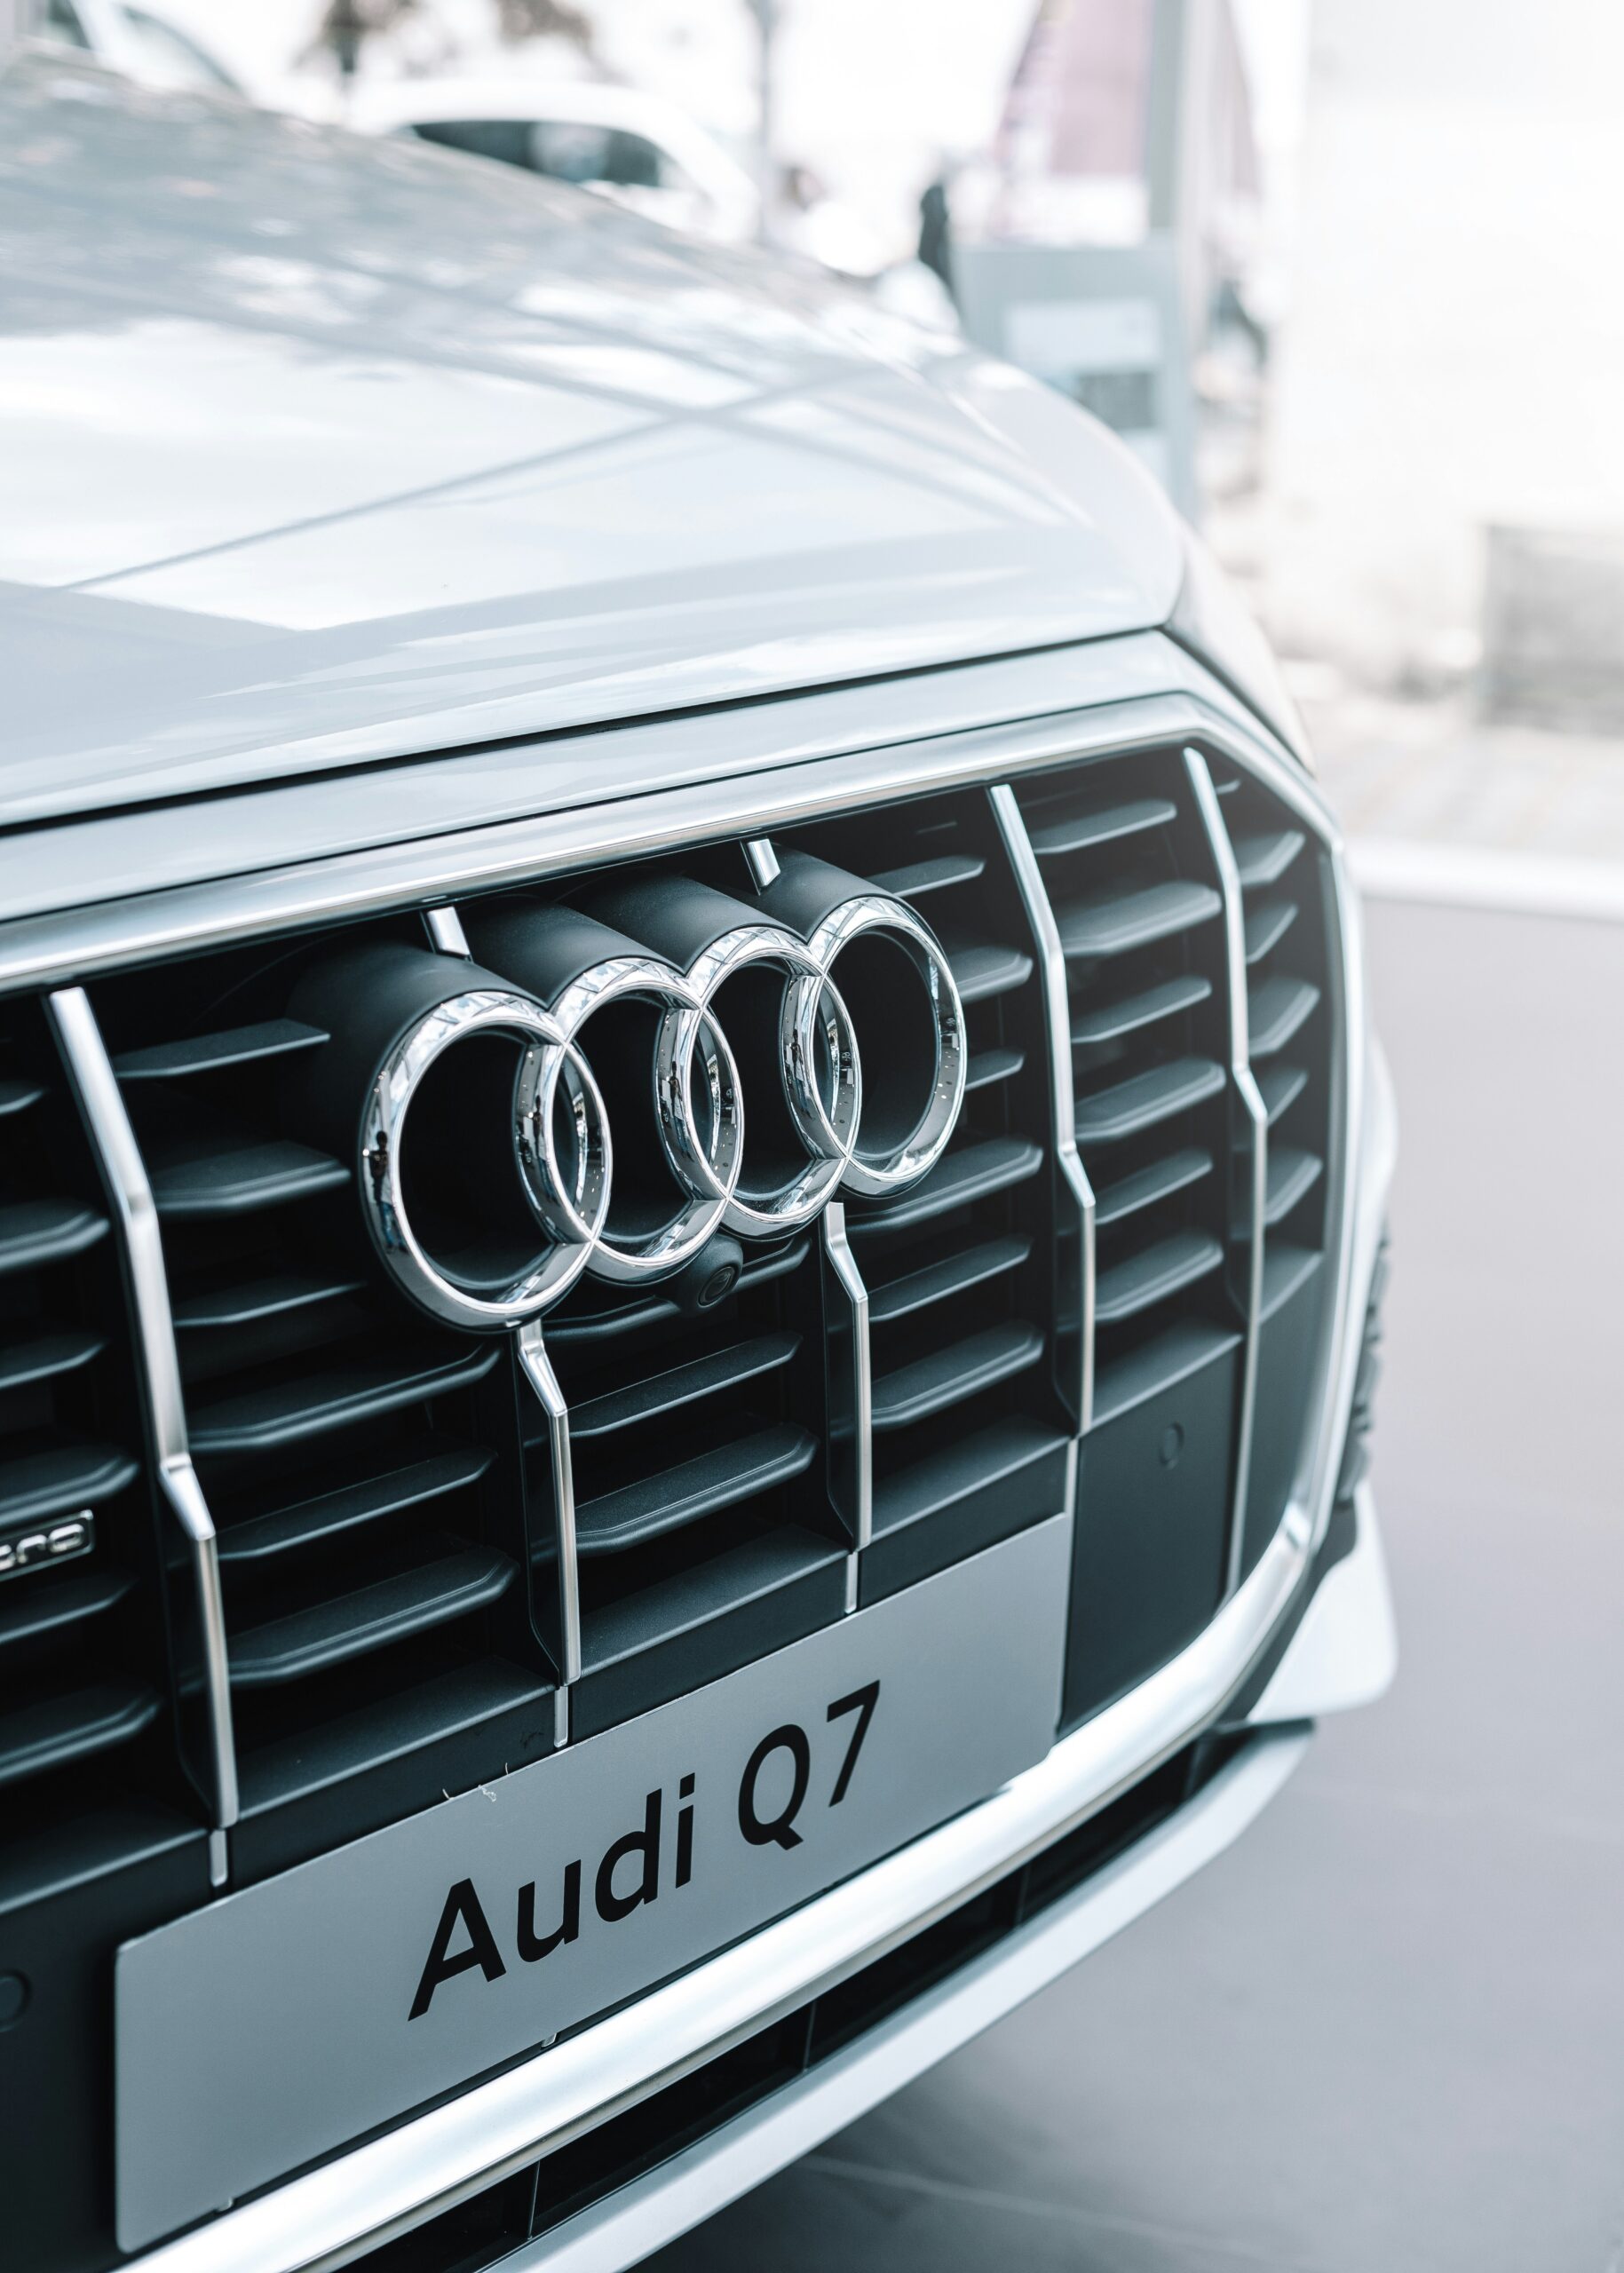 Read more about the article The Audi Q7: A Luxurious SUV with Style